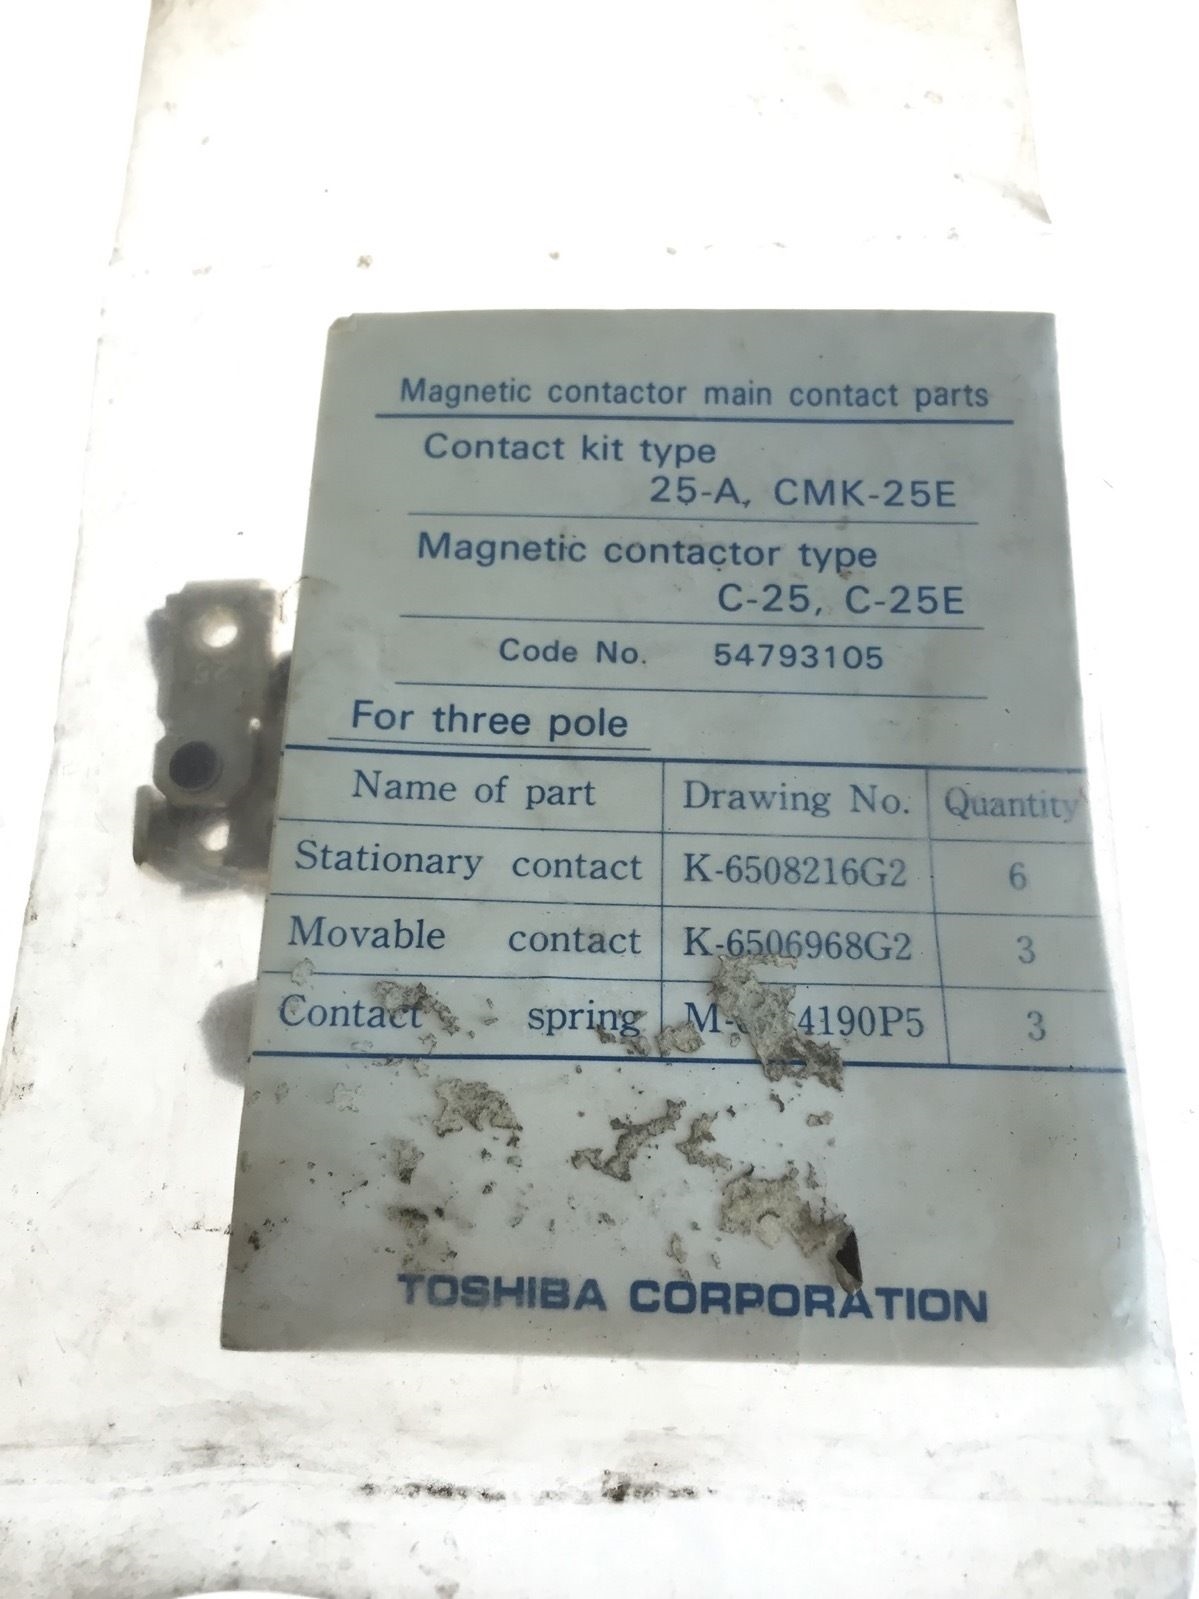 NEW IN BAG Toshiba Magnetic Contactor Kit 25-A CMK-25E C-25 C-25E, (H87) 1